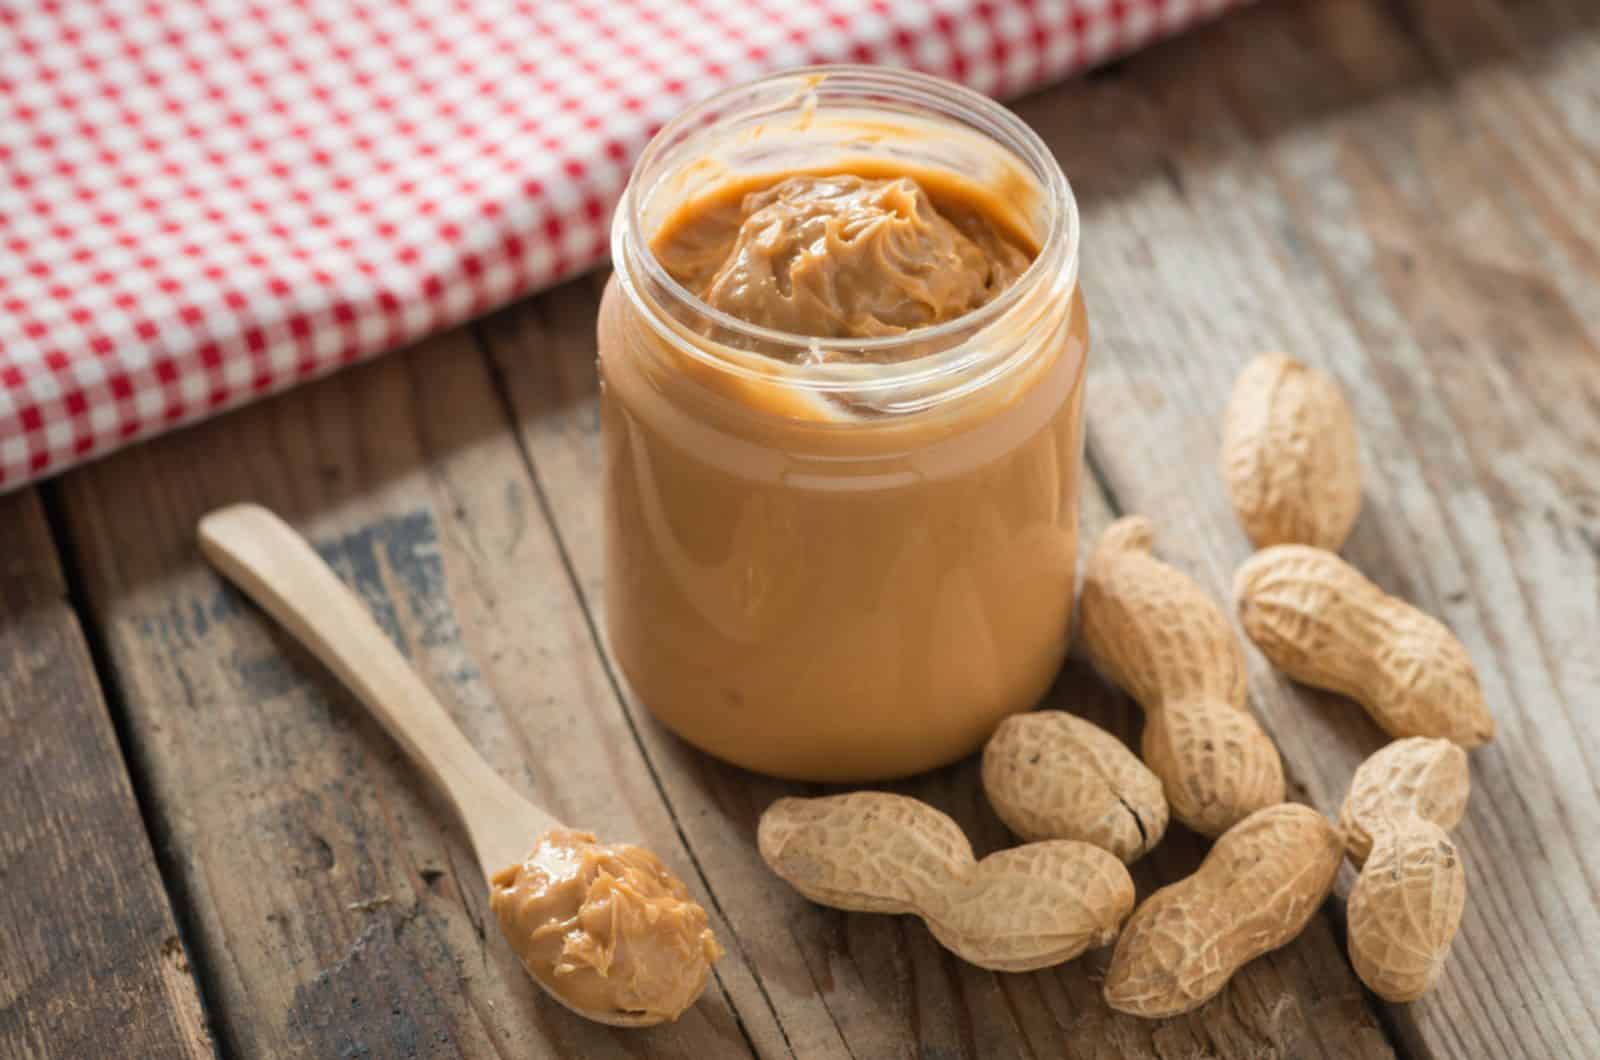 Creamy and smooth peanut butter in jar 